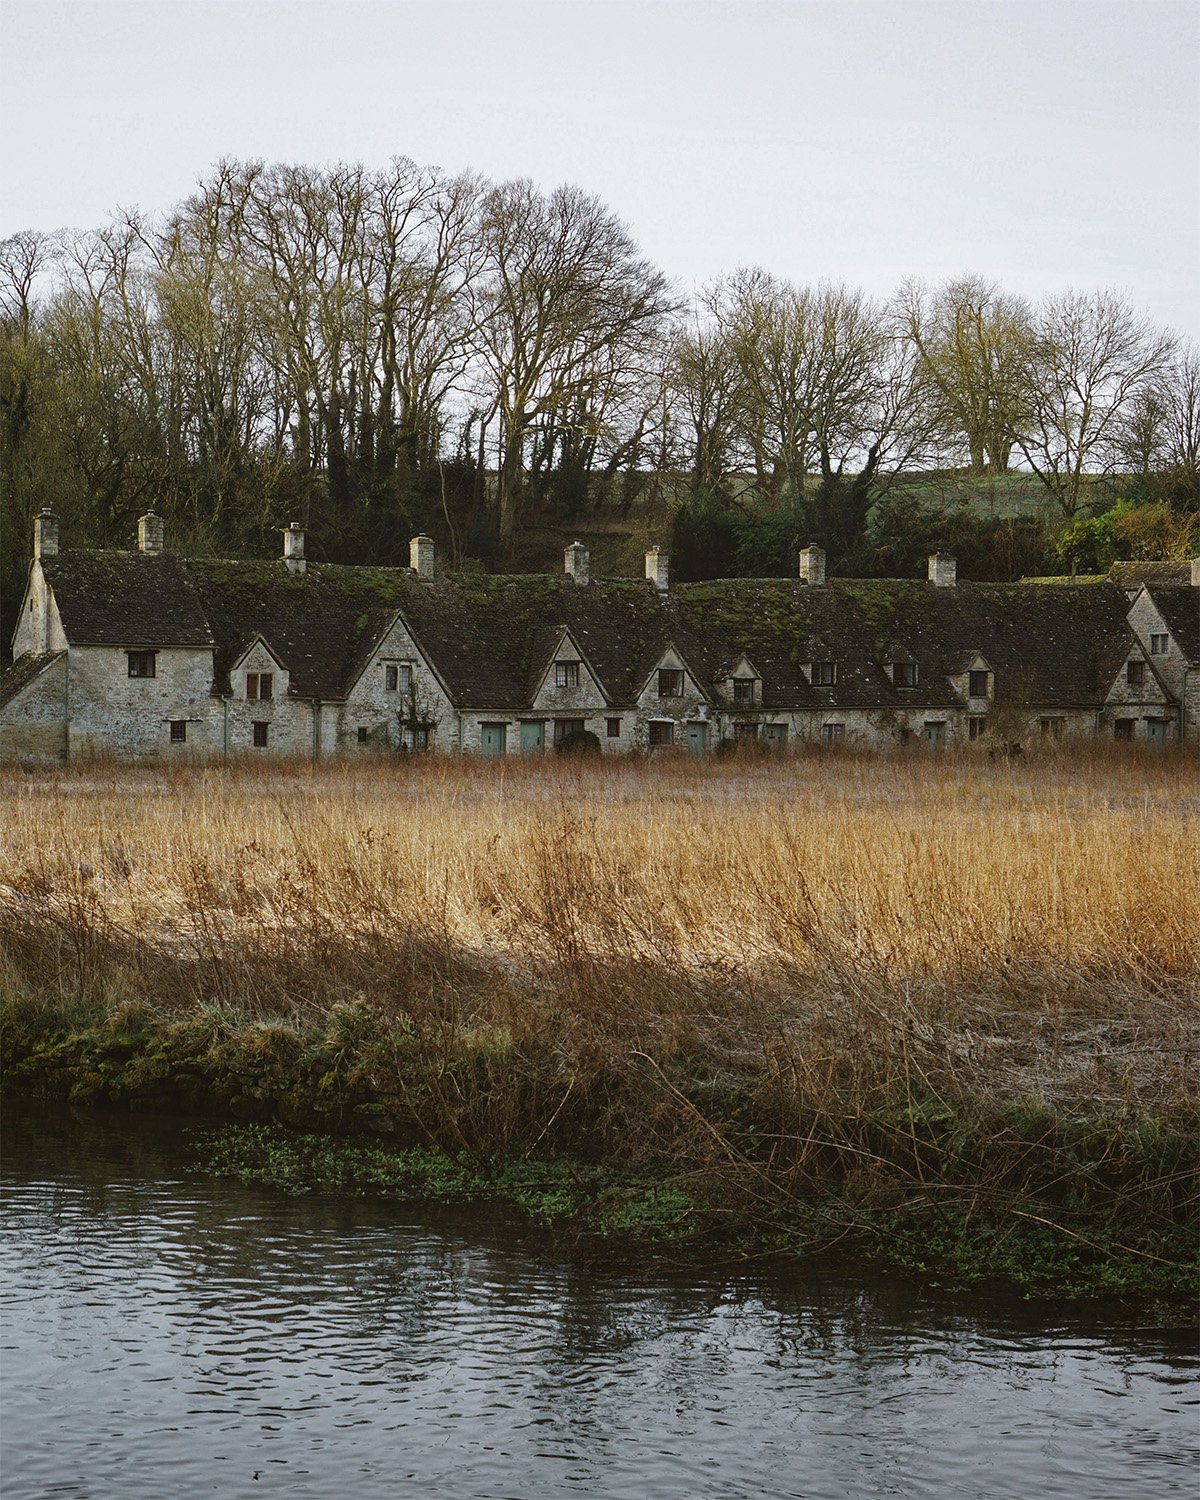 A TRAVEL GUIDE TO THE PETITE VILLAGE OF BIBURY — The September Chronicles